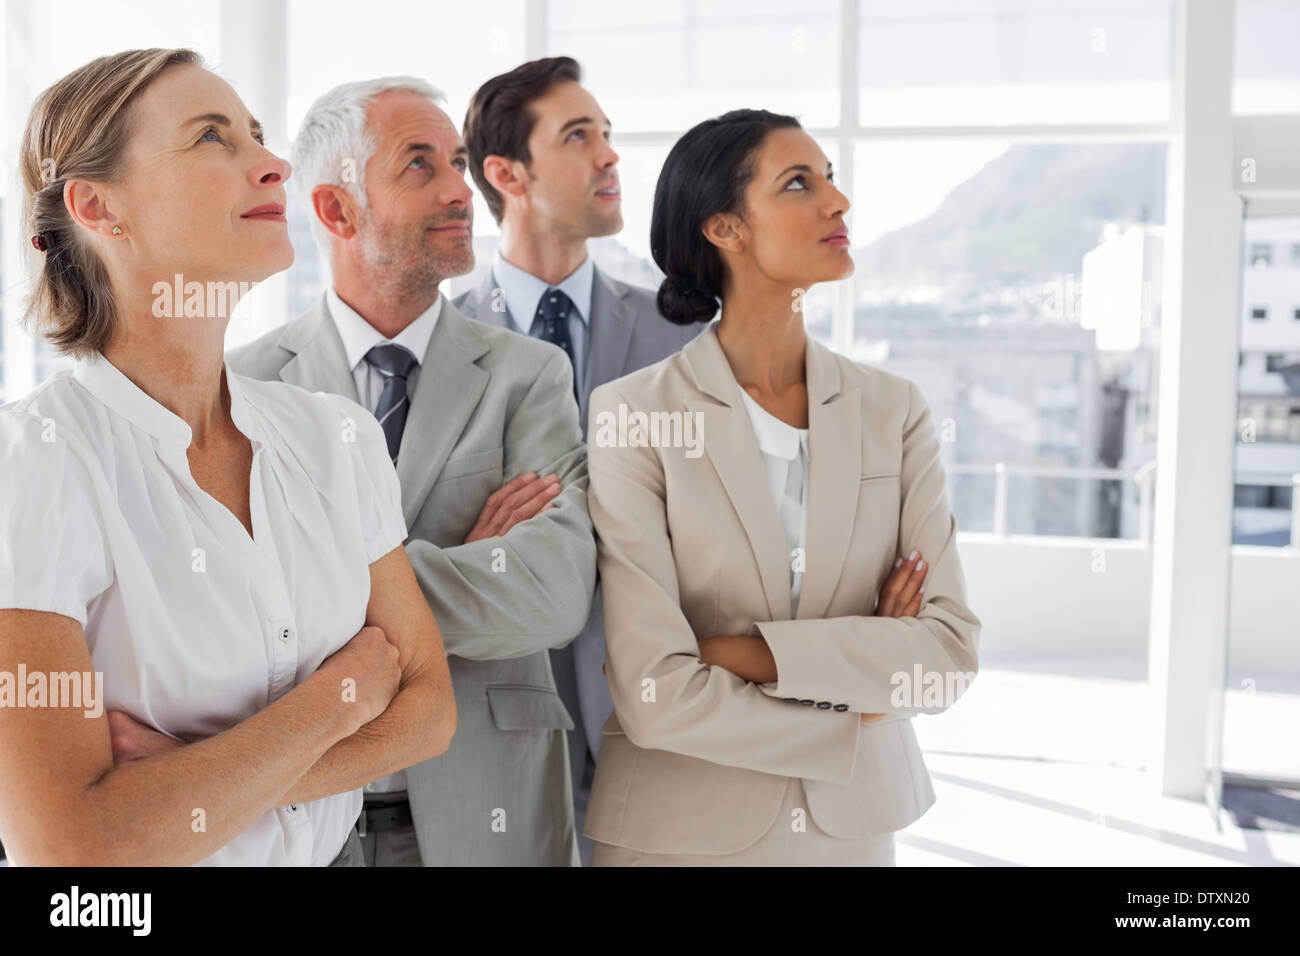 Business people looking at the same way Stock Photo